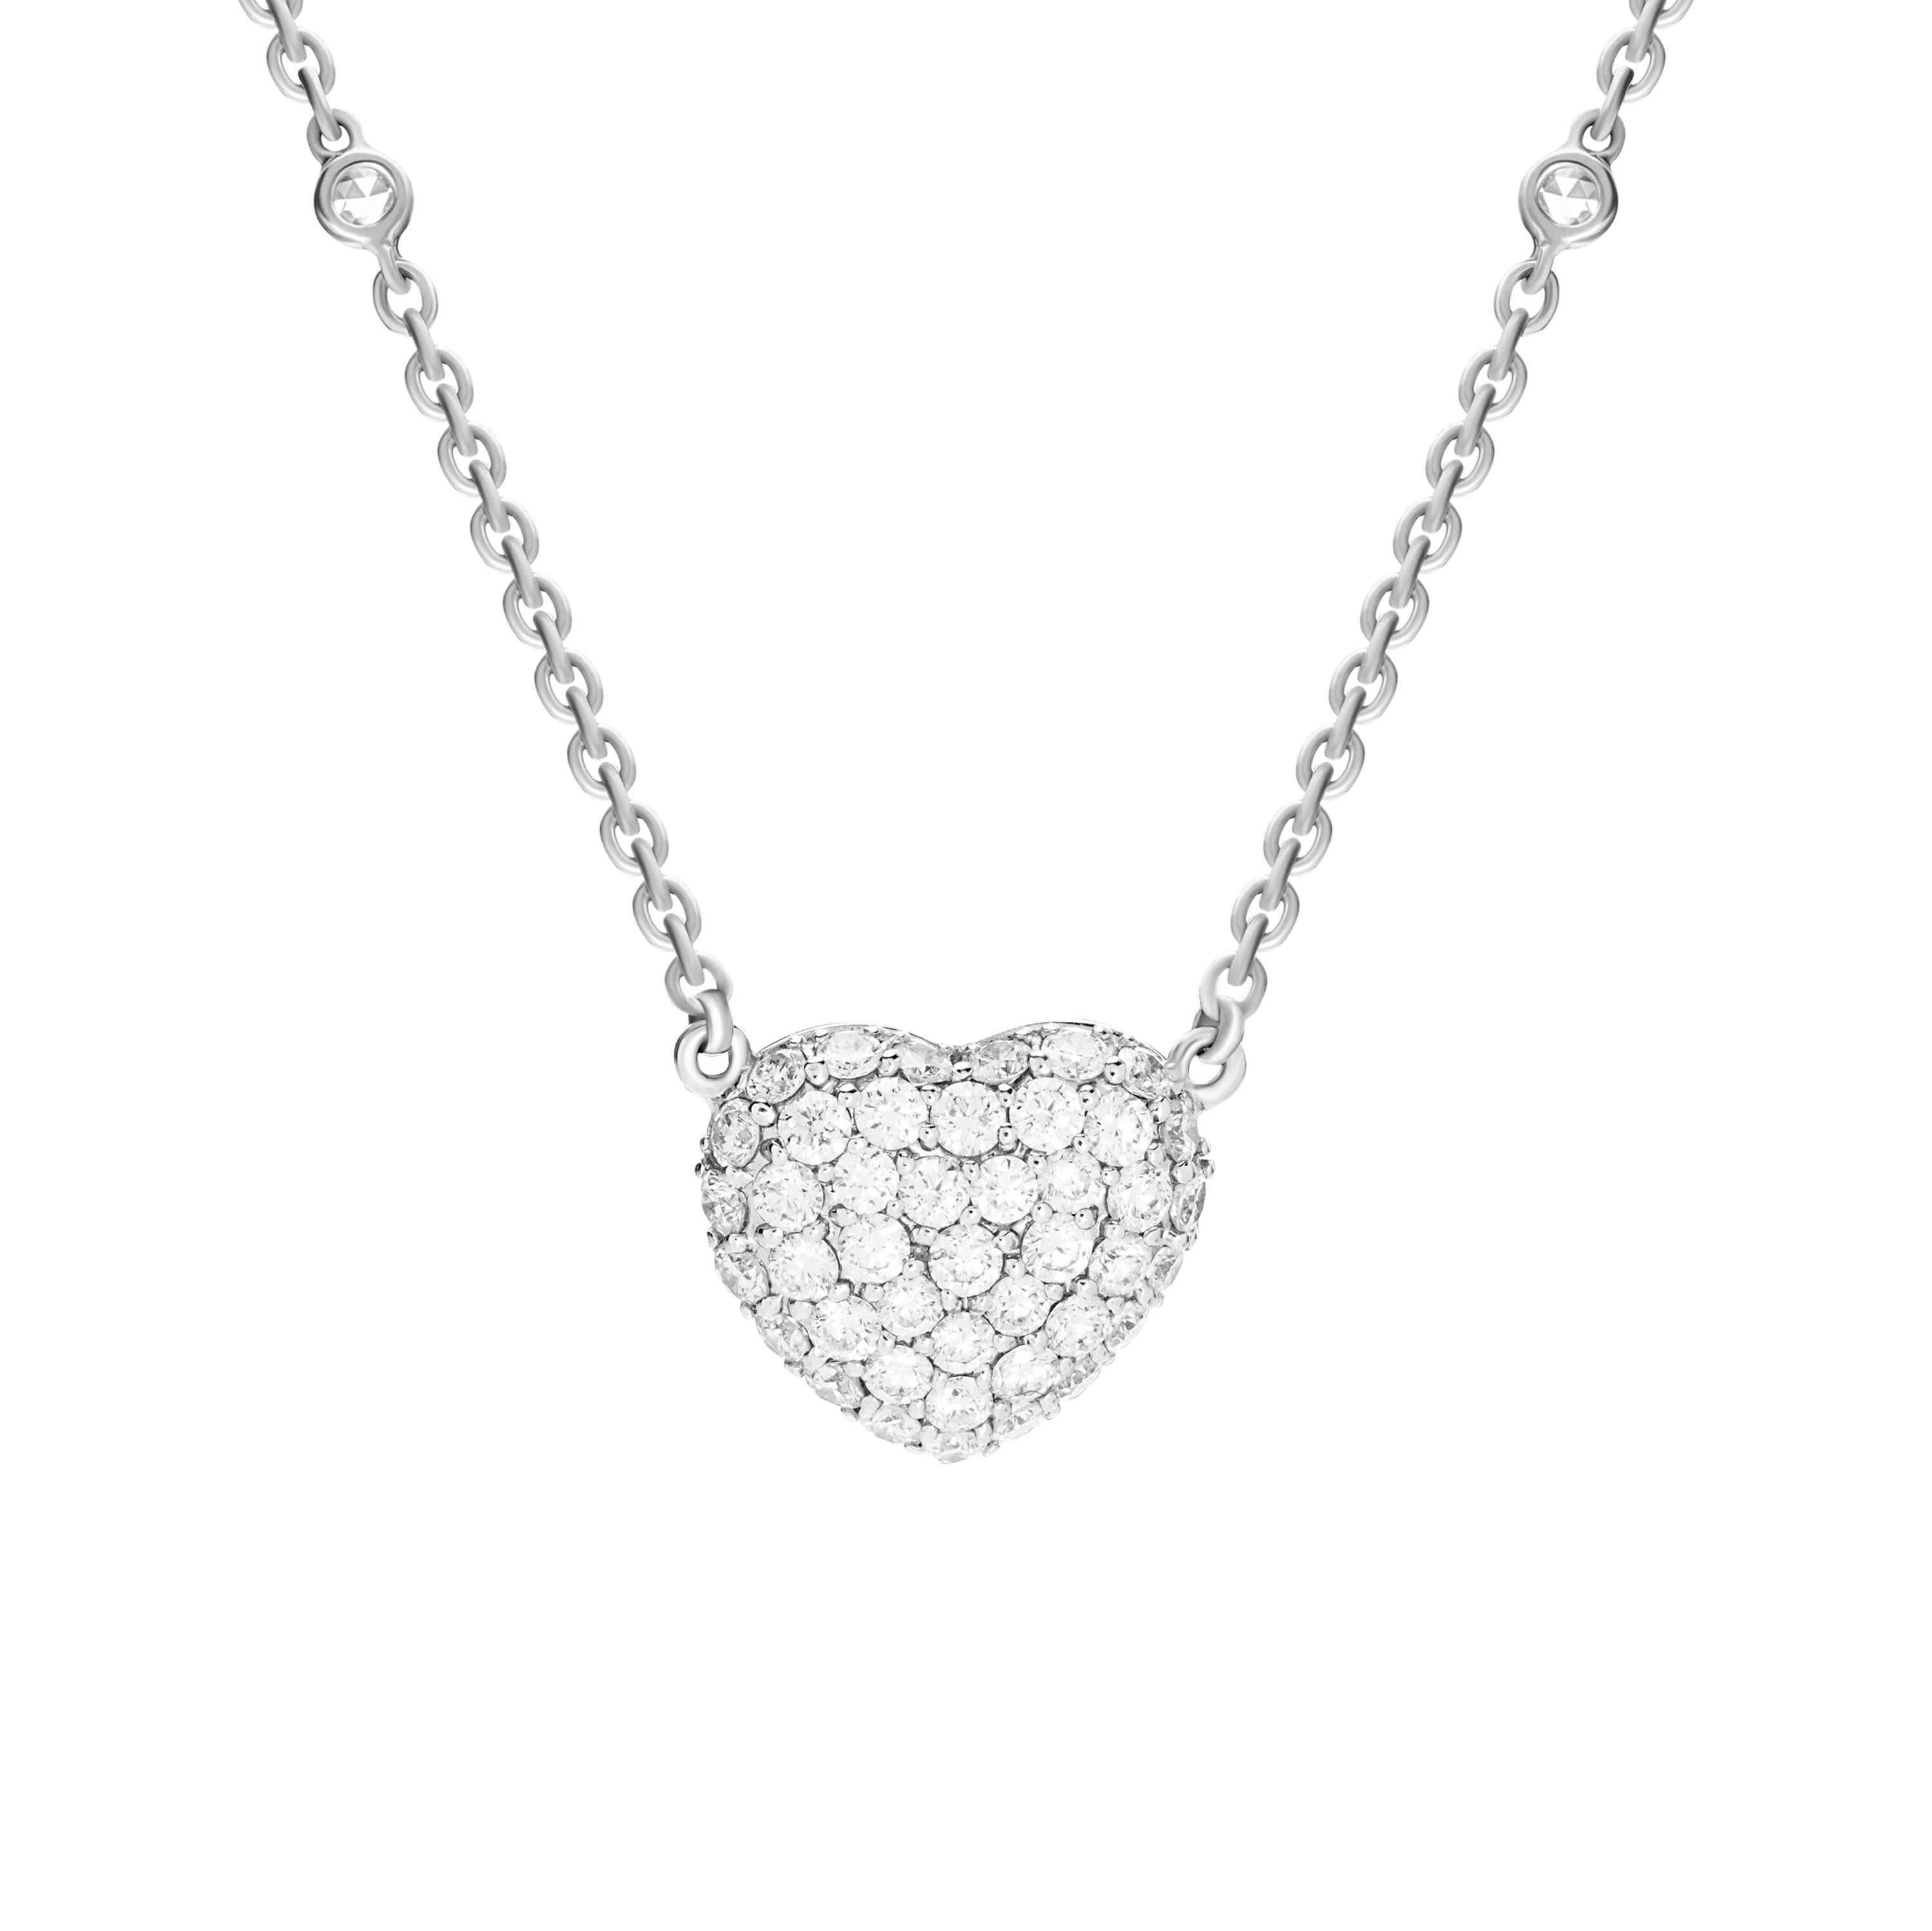 Sparkling pavé-set diamonds (totaling 1.65 carats) bring a bright shine to this 18-karat white gold necklace.  Symbolic of your beautiful love story, the round diamonds completely fill a sweet and puffy heart.  Surprise her with this romantic